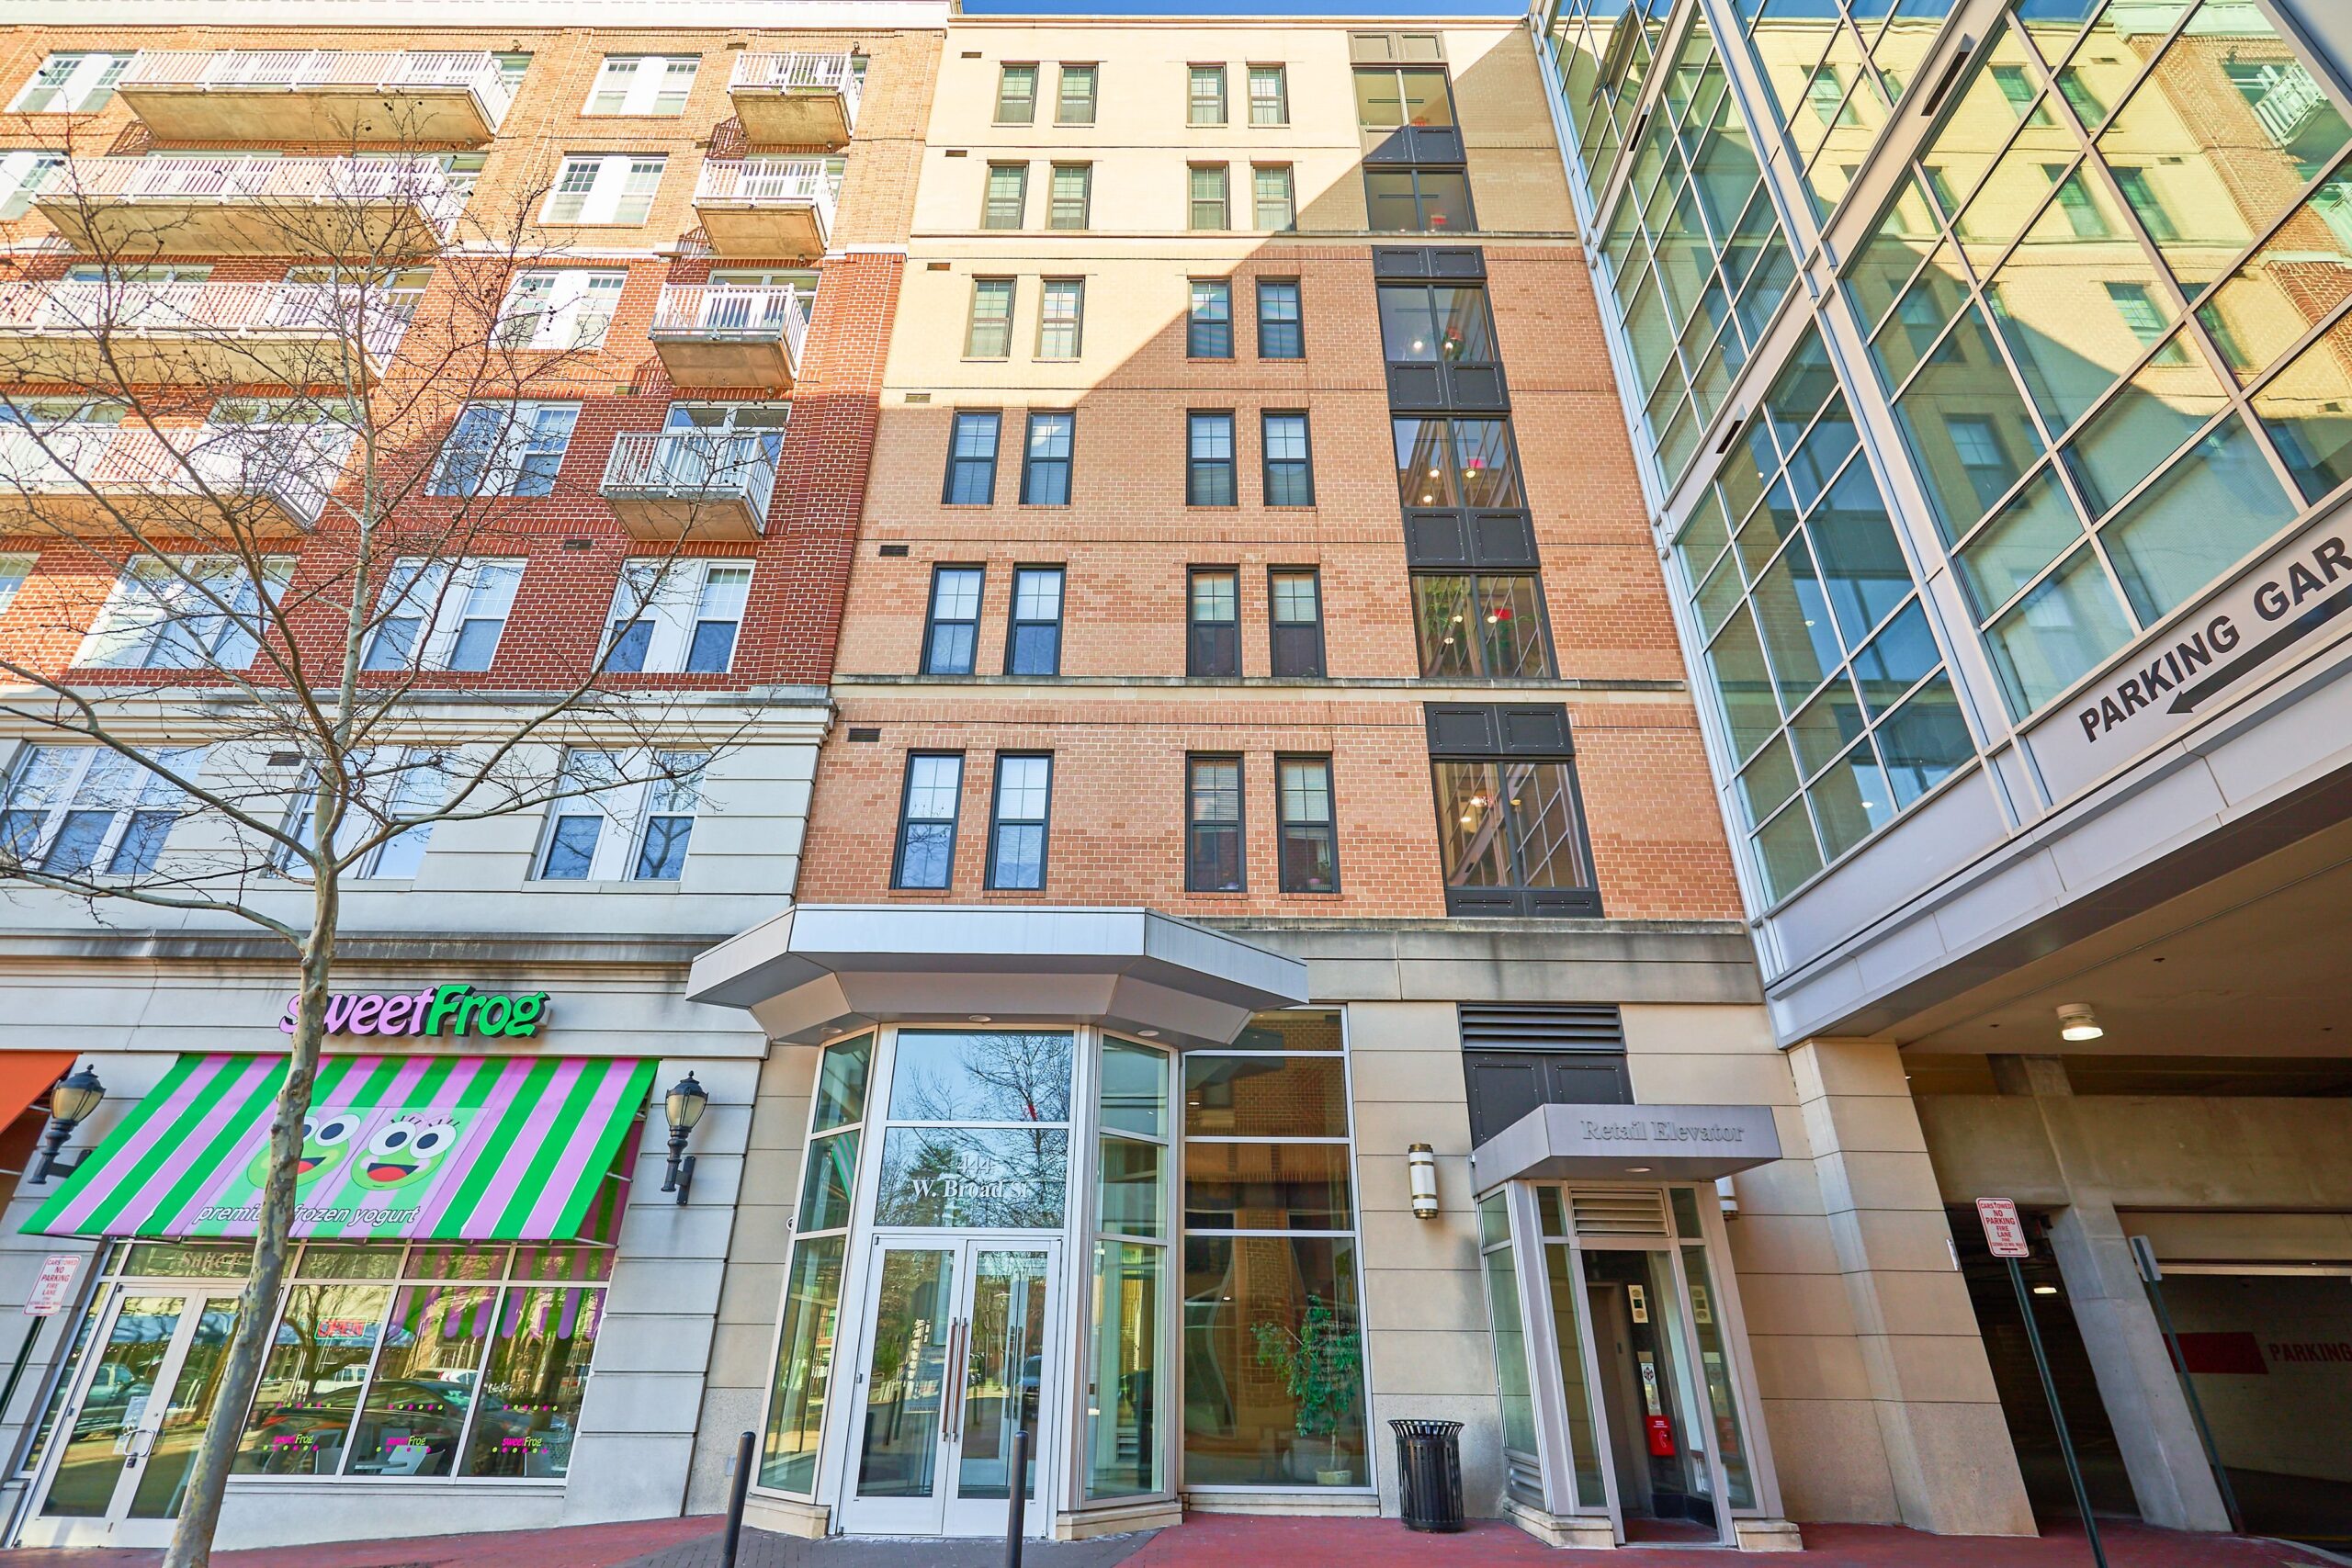 Professional exterior photo of 444 W Broad St Unit 631 - showing the full front facade of The Spectrum apartments between a Sweet Frog and a parking garage.